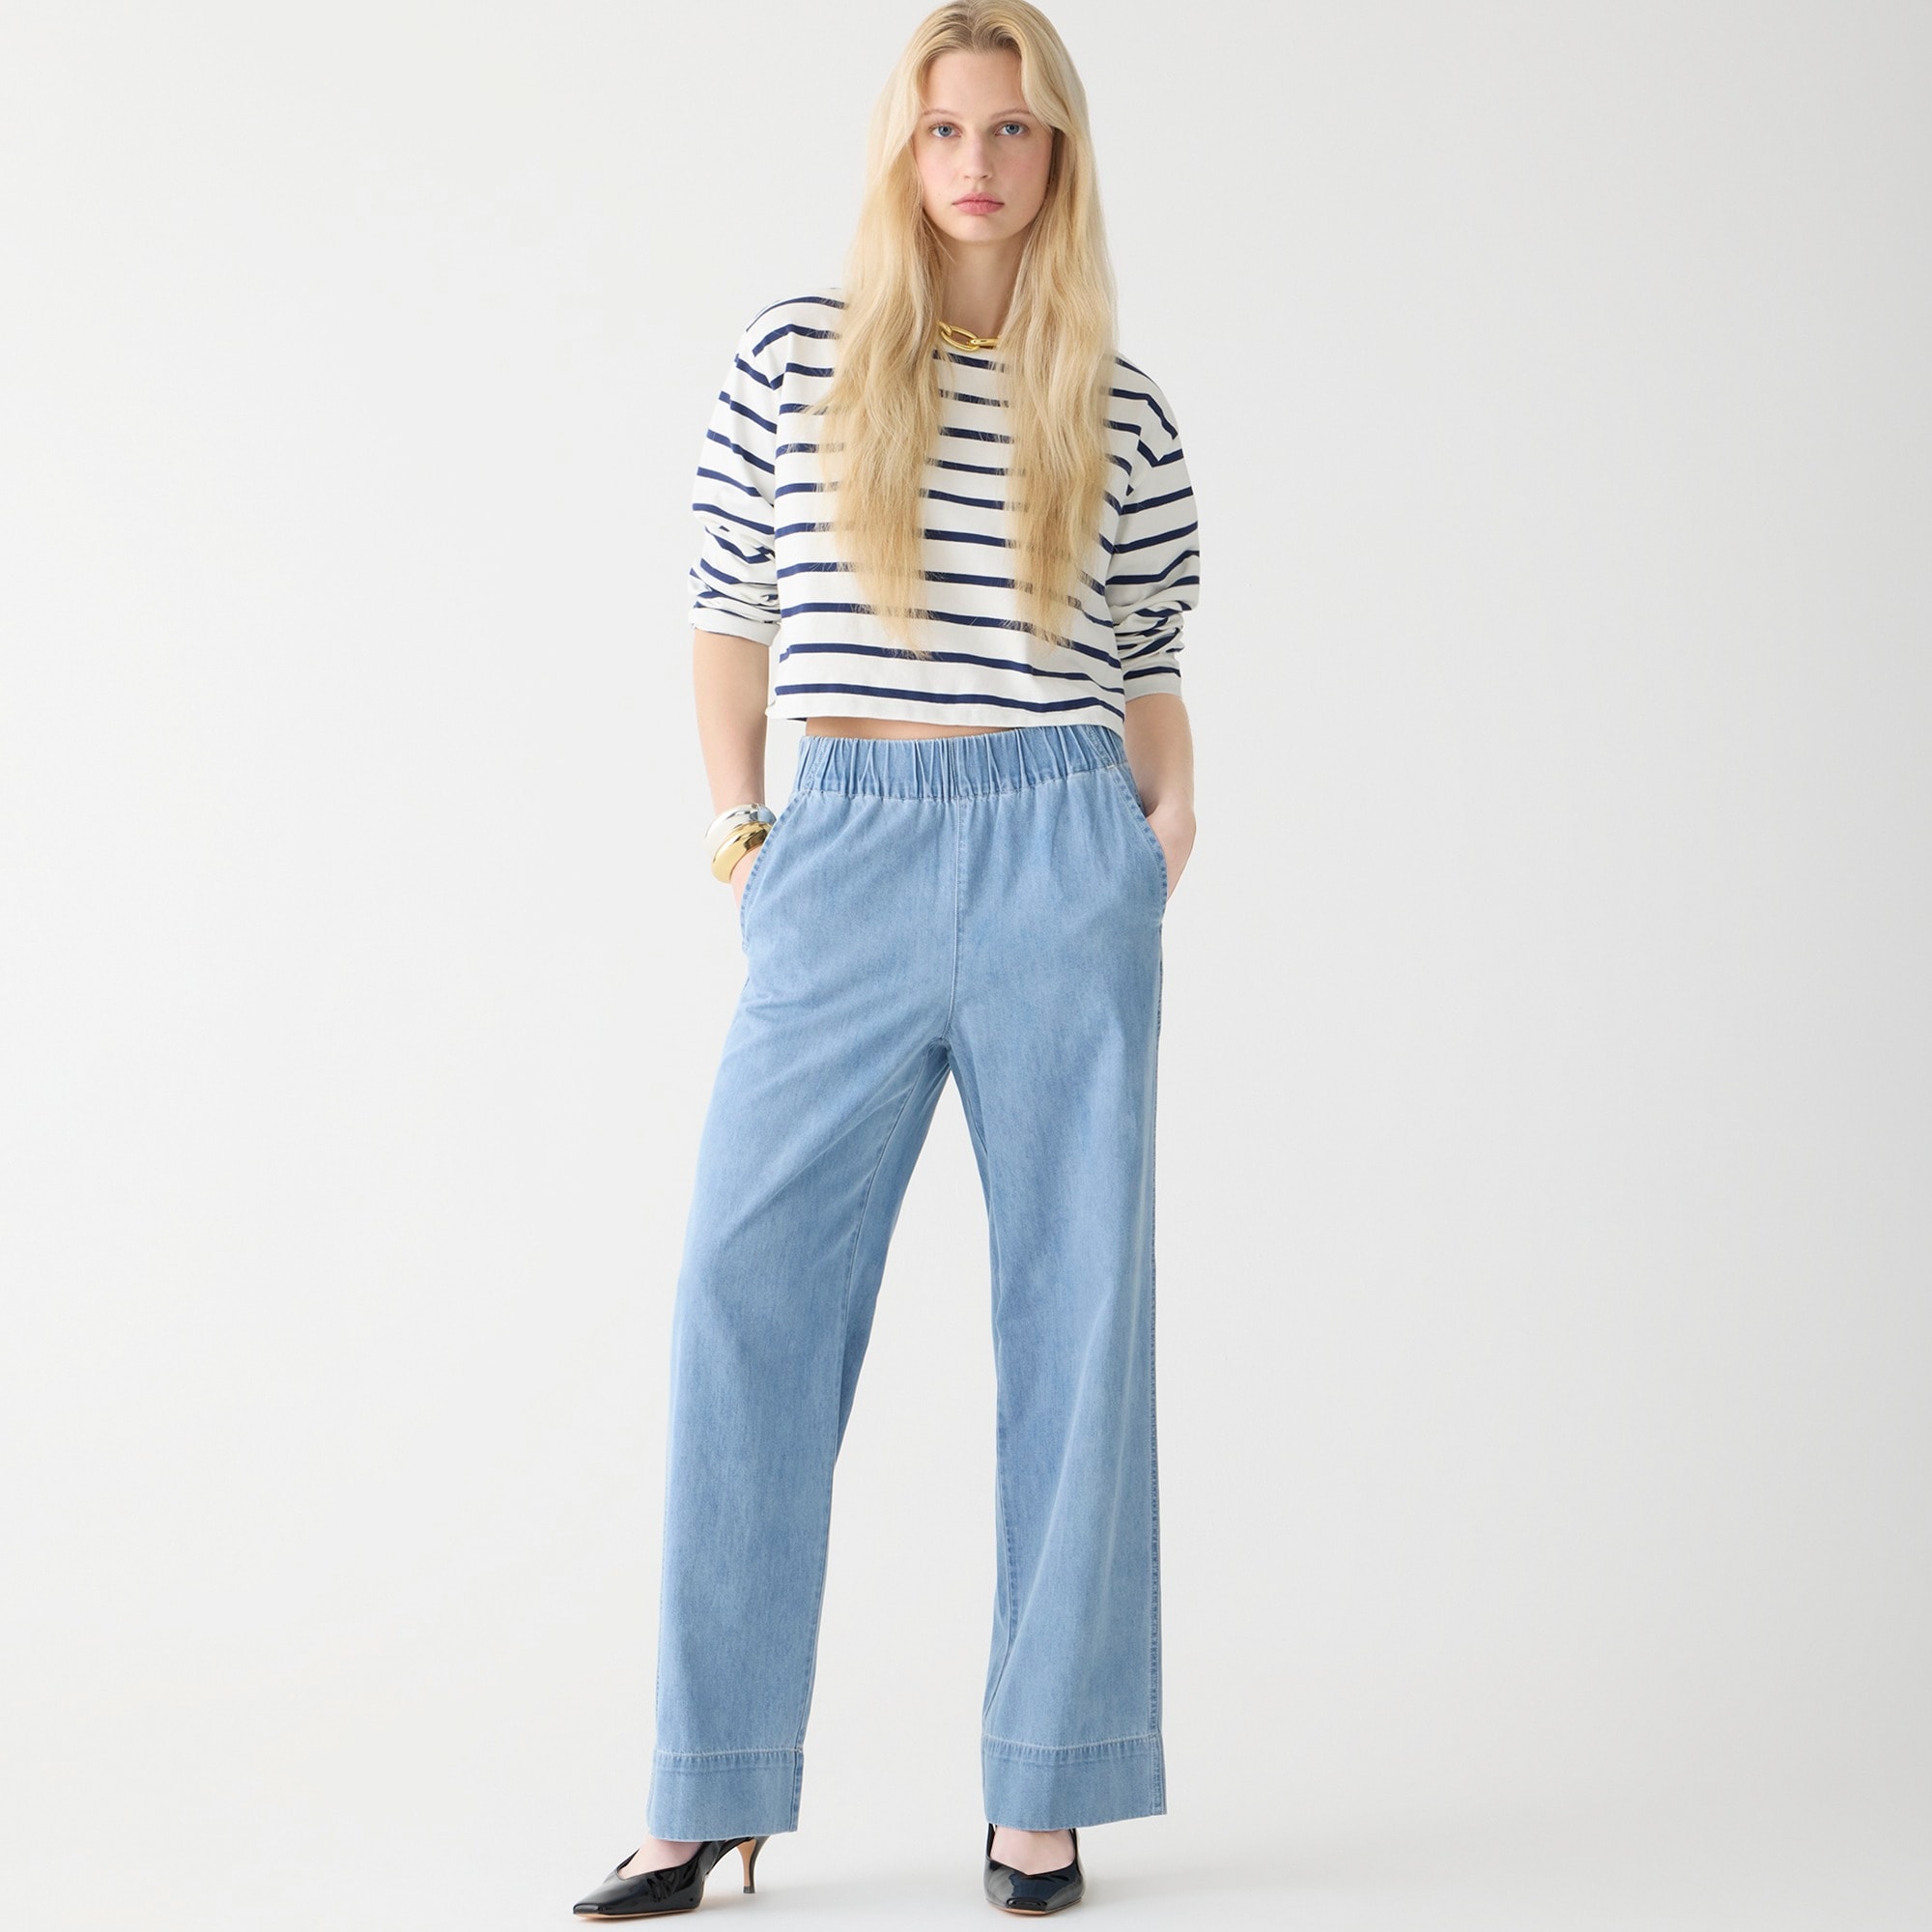  Tall Astrid pant in chambray